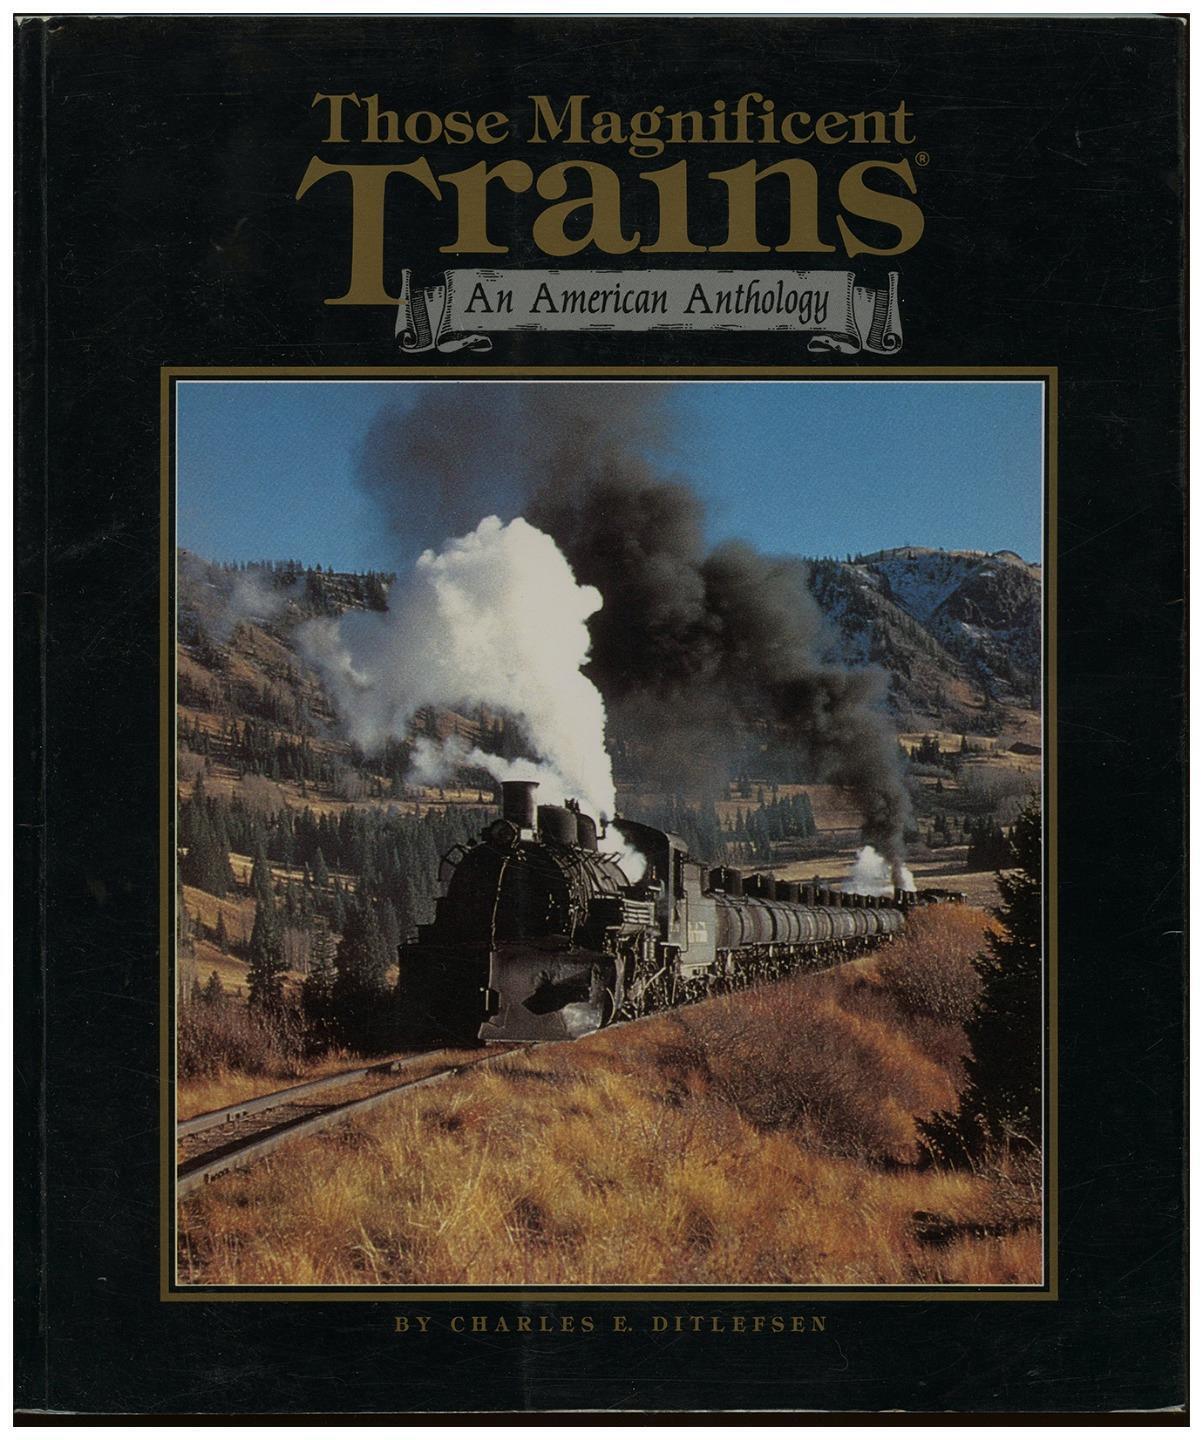 Those Magnificent Trains An American Anthology Charles E. Ditlefsen 1st Ed. PB